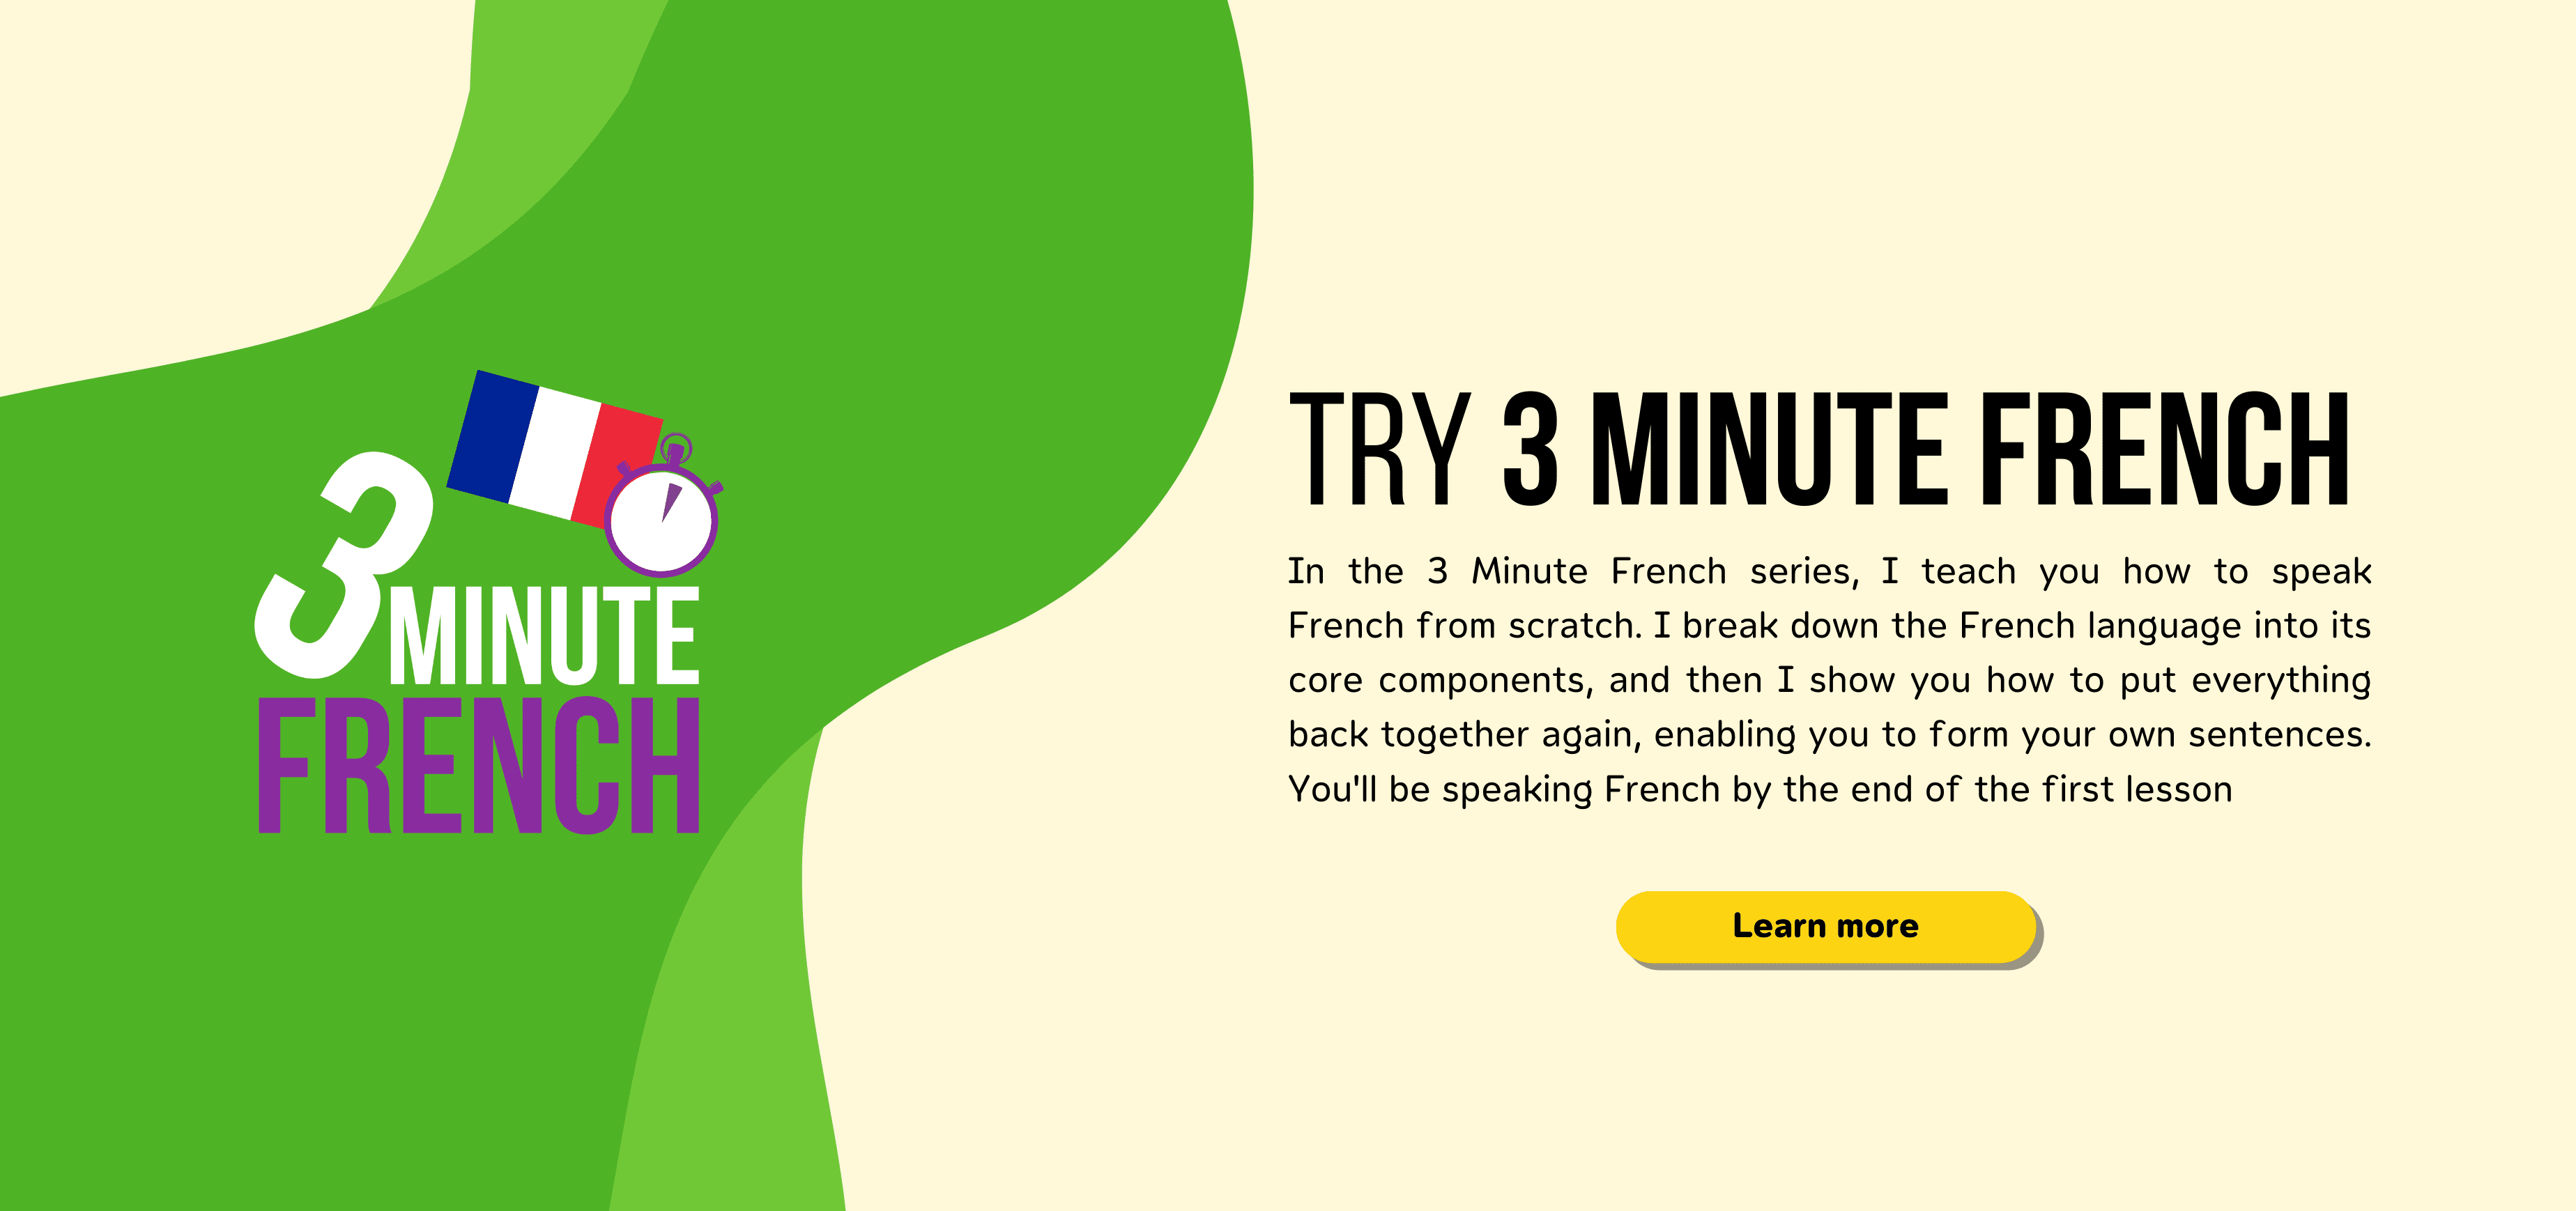 Try 3 Minute French